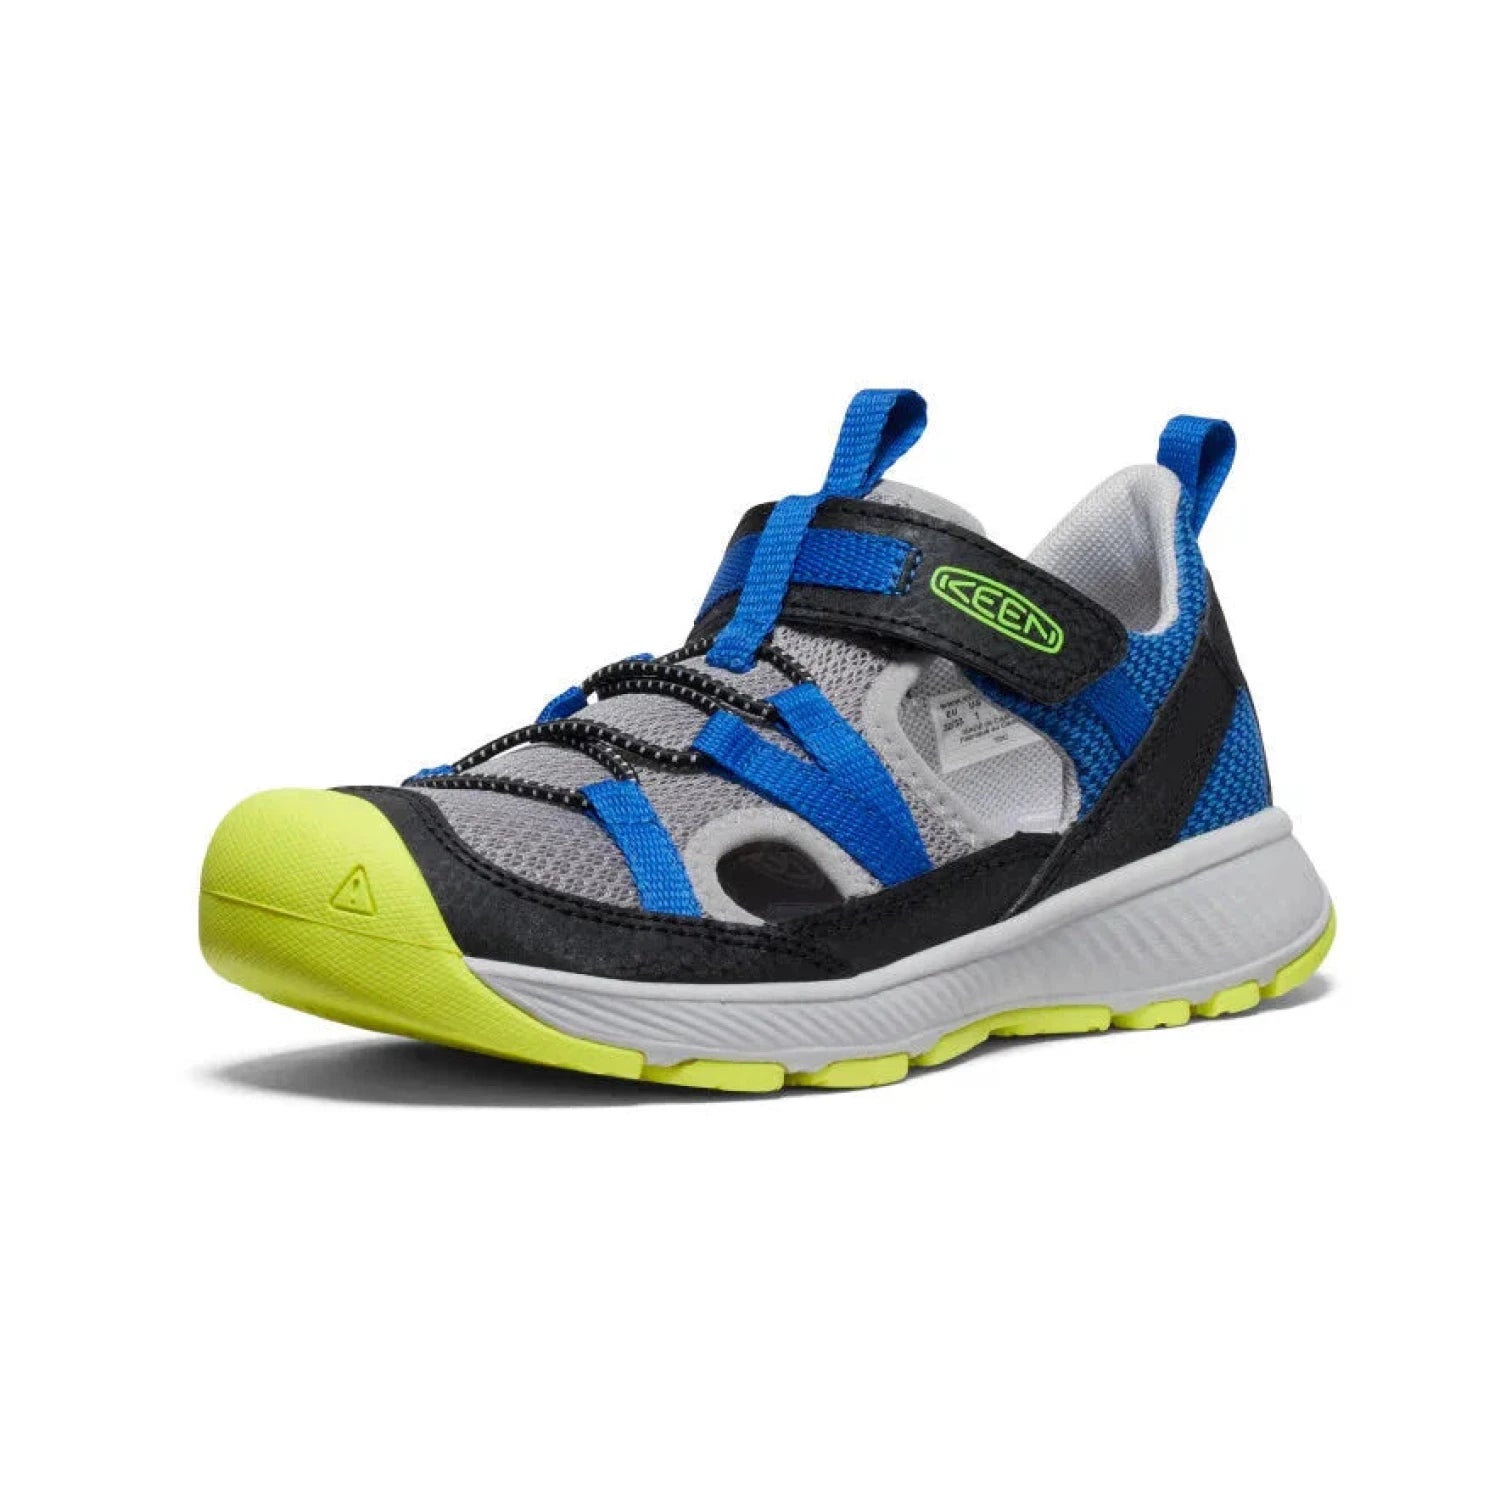 KEEN K's Motozoa Sandal, Classic Blue Primrose, front and side view 